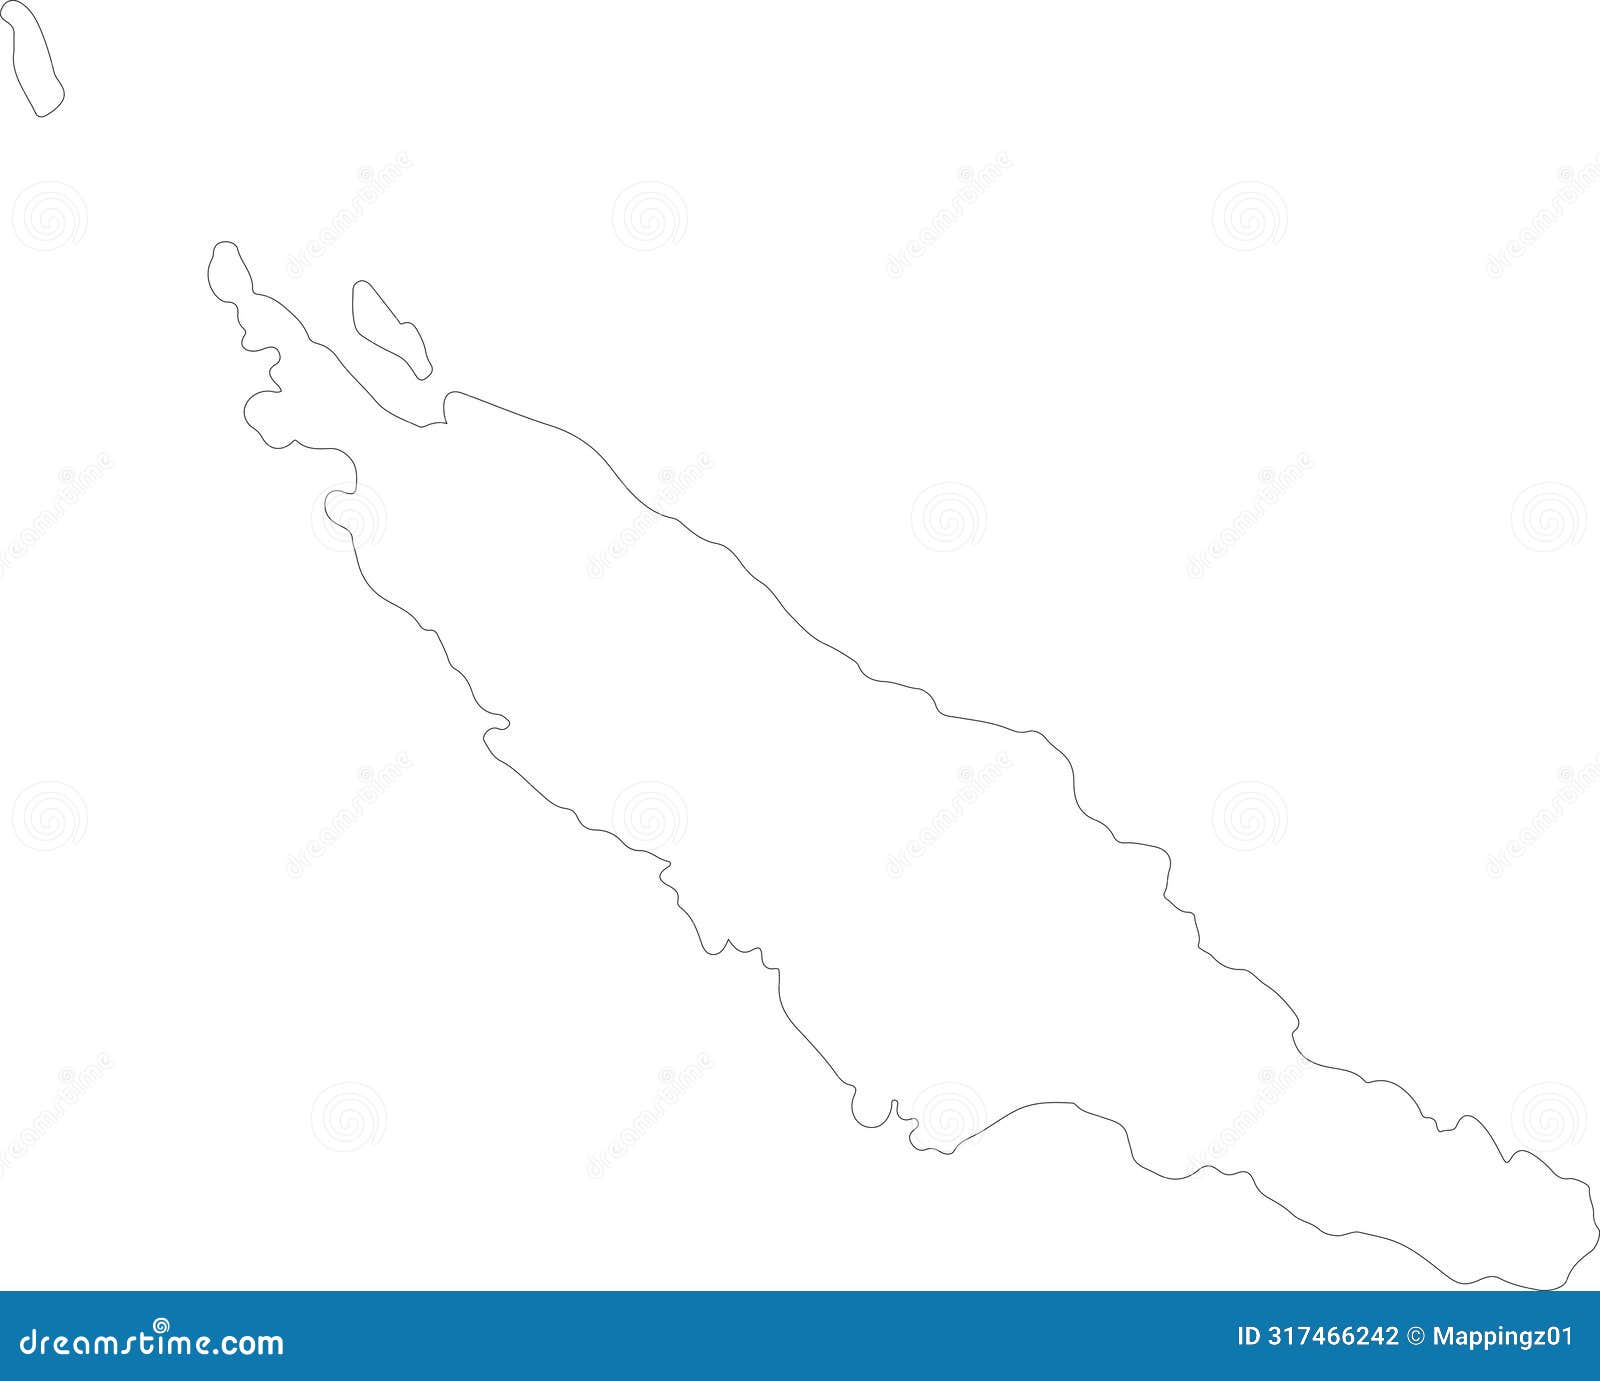 nord new caledonia outline map